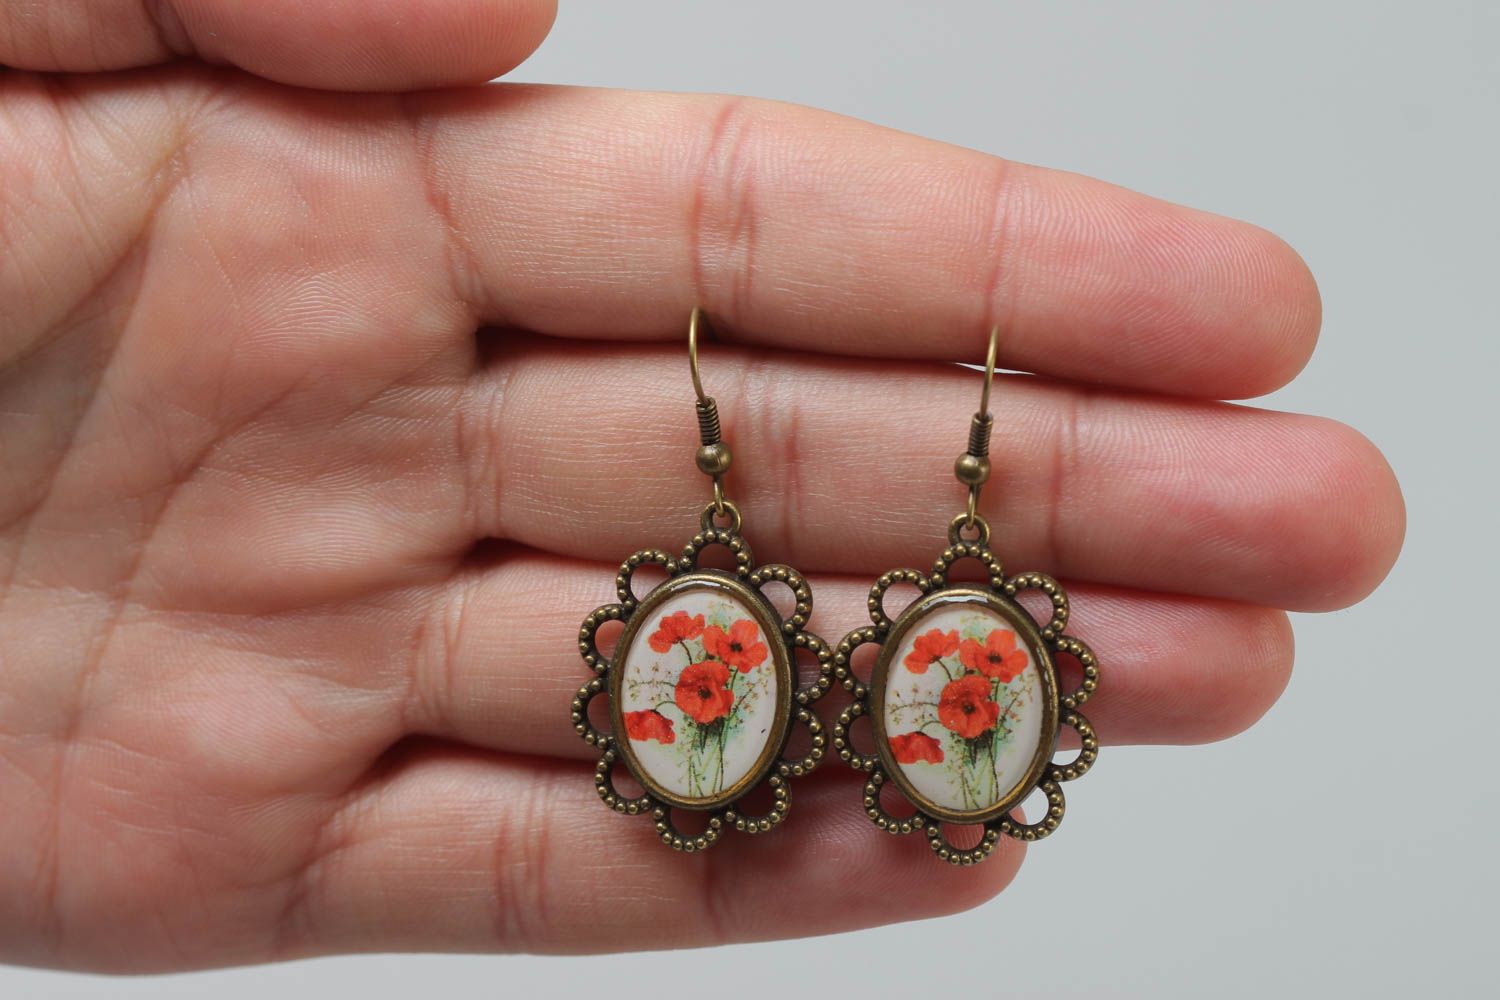 Handmade oval dangling earrings with lacy metal basis and poppy flowers image photo 5